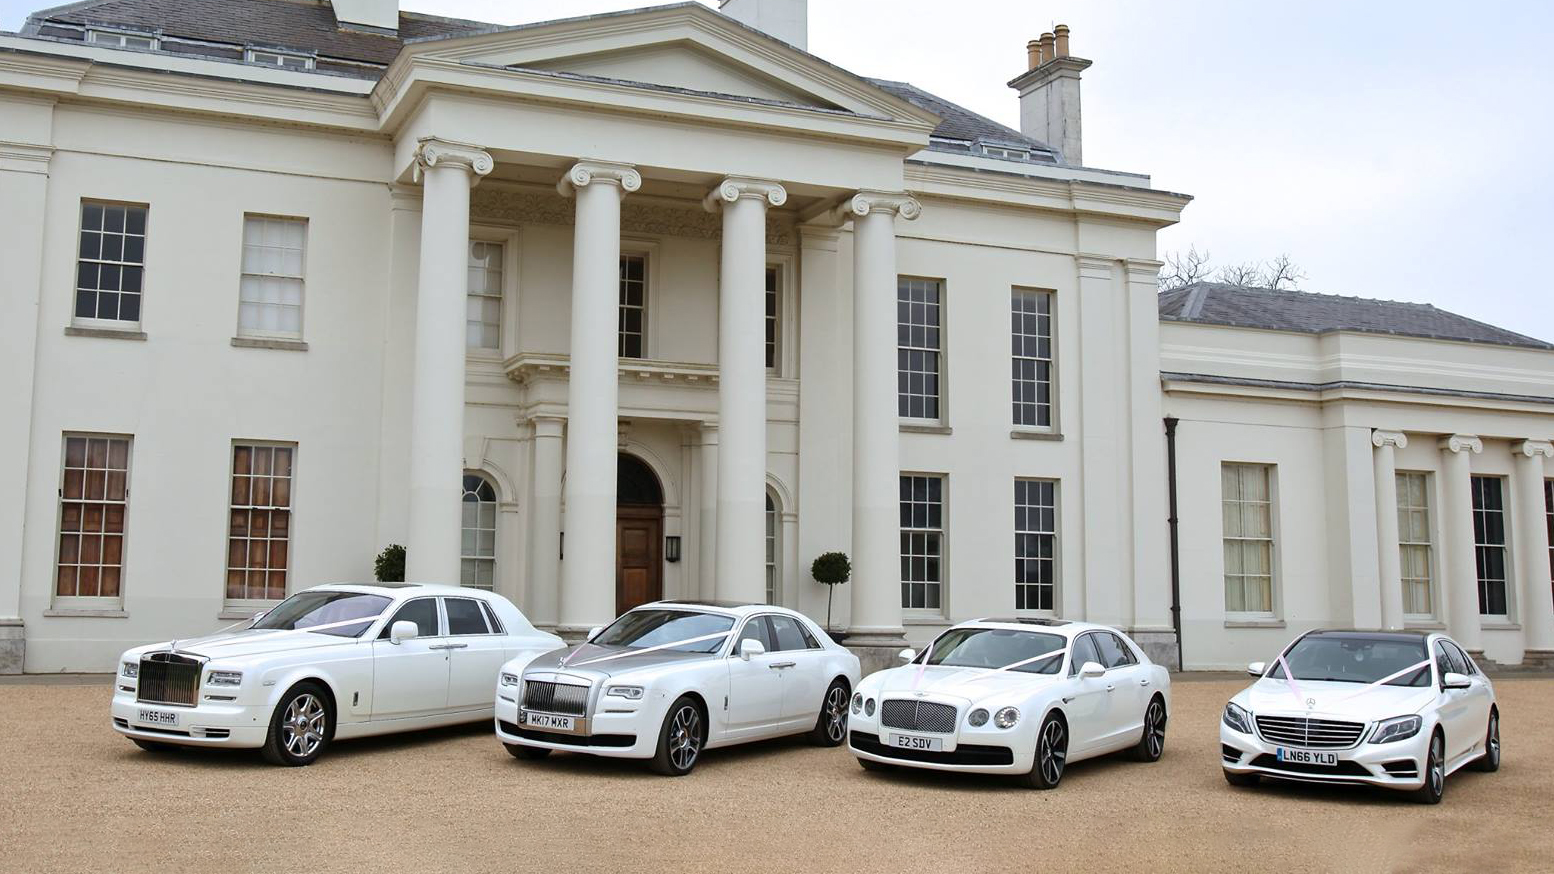 A selection of white Luxurious and modern vehicles all decorated with matching white ribbons on wedding duties in Bedford. Frot Left to right: Rolls-Royce Phantom, Rolls-Royce Ghos